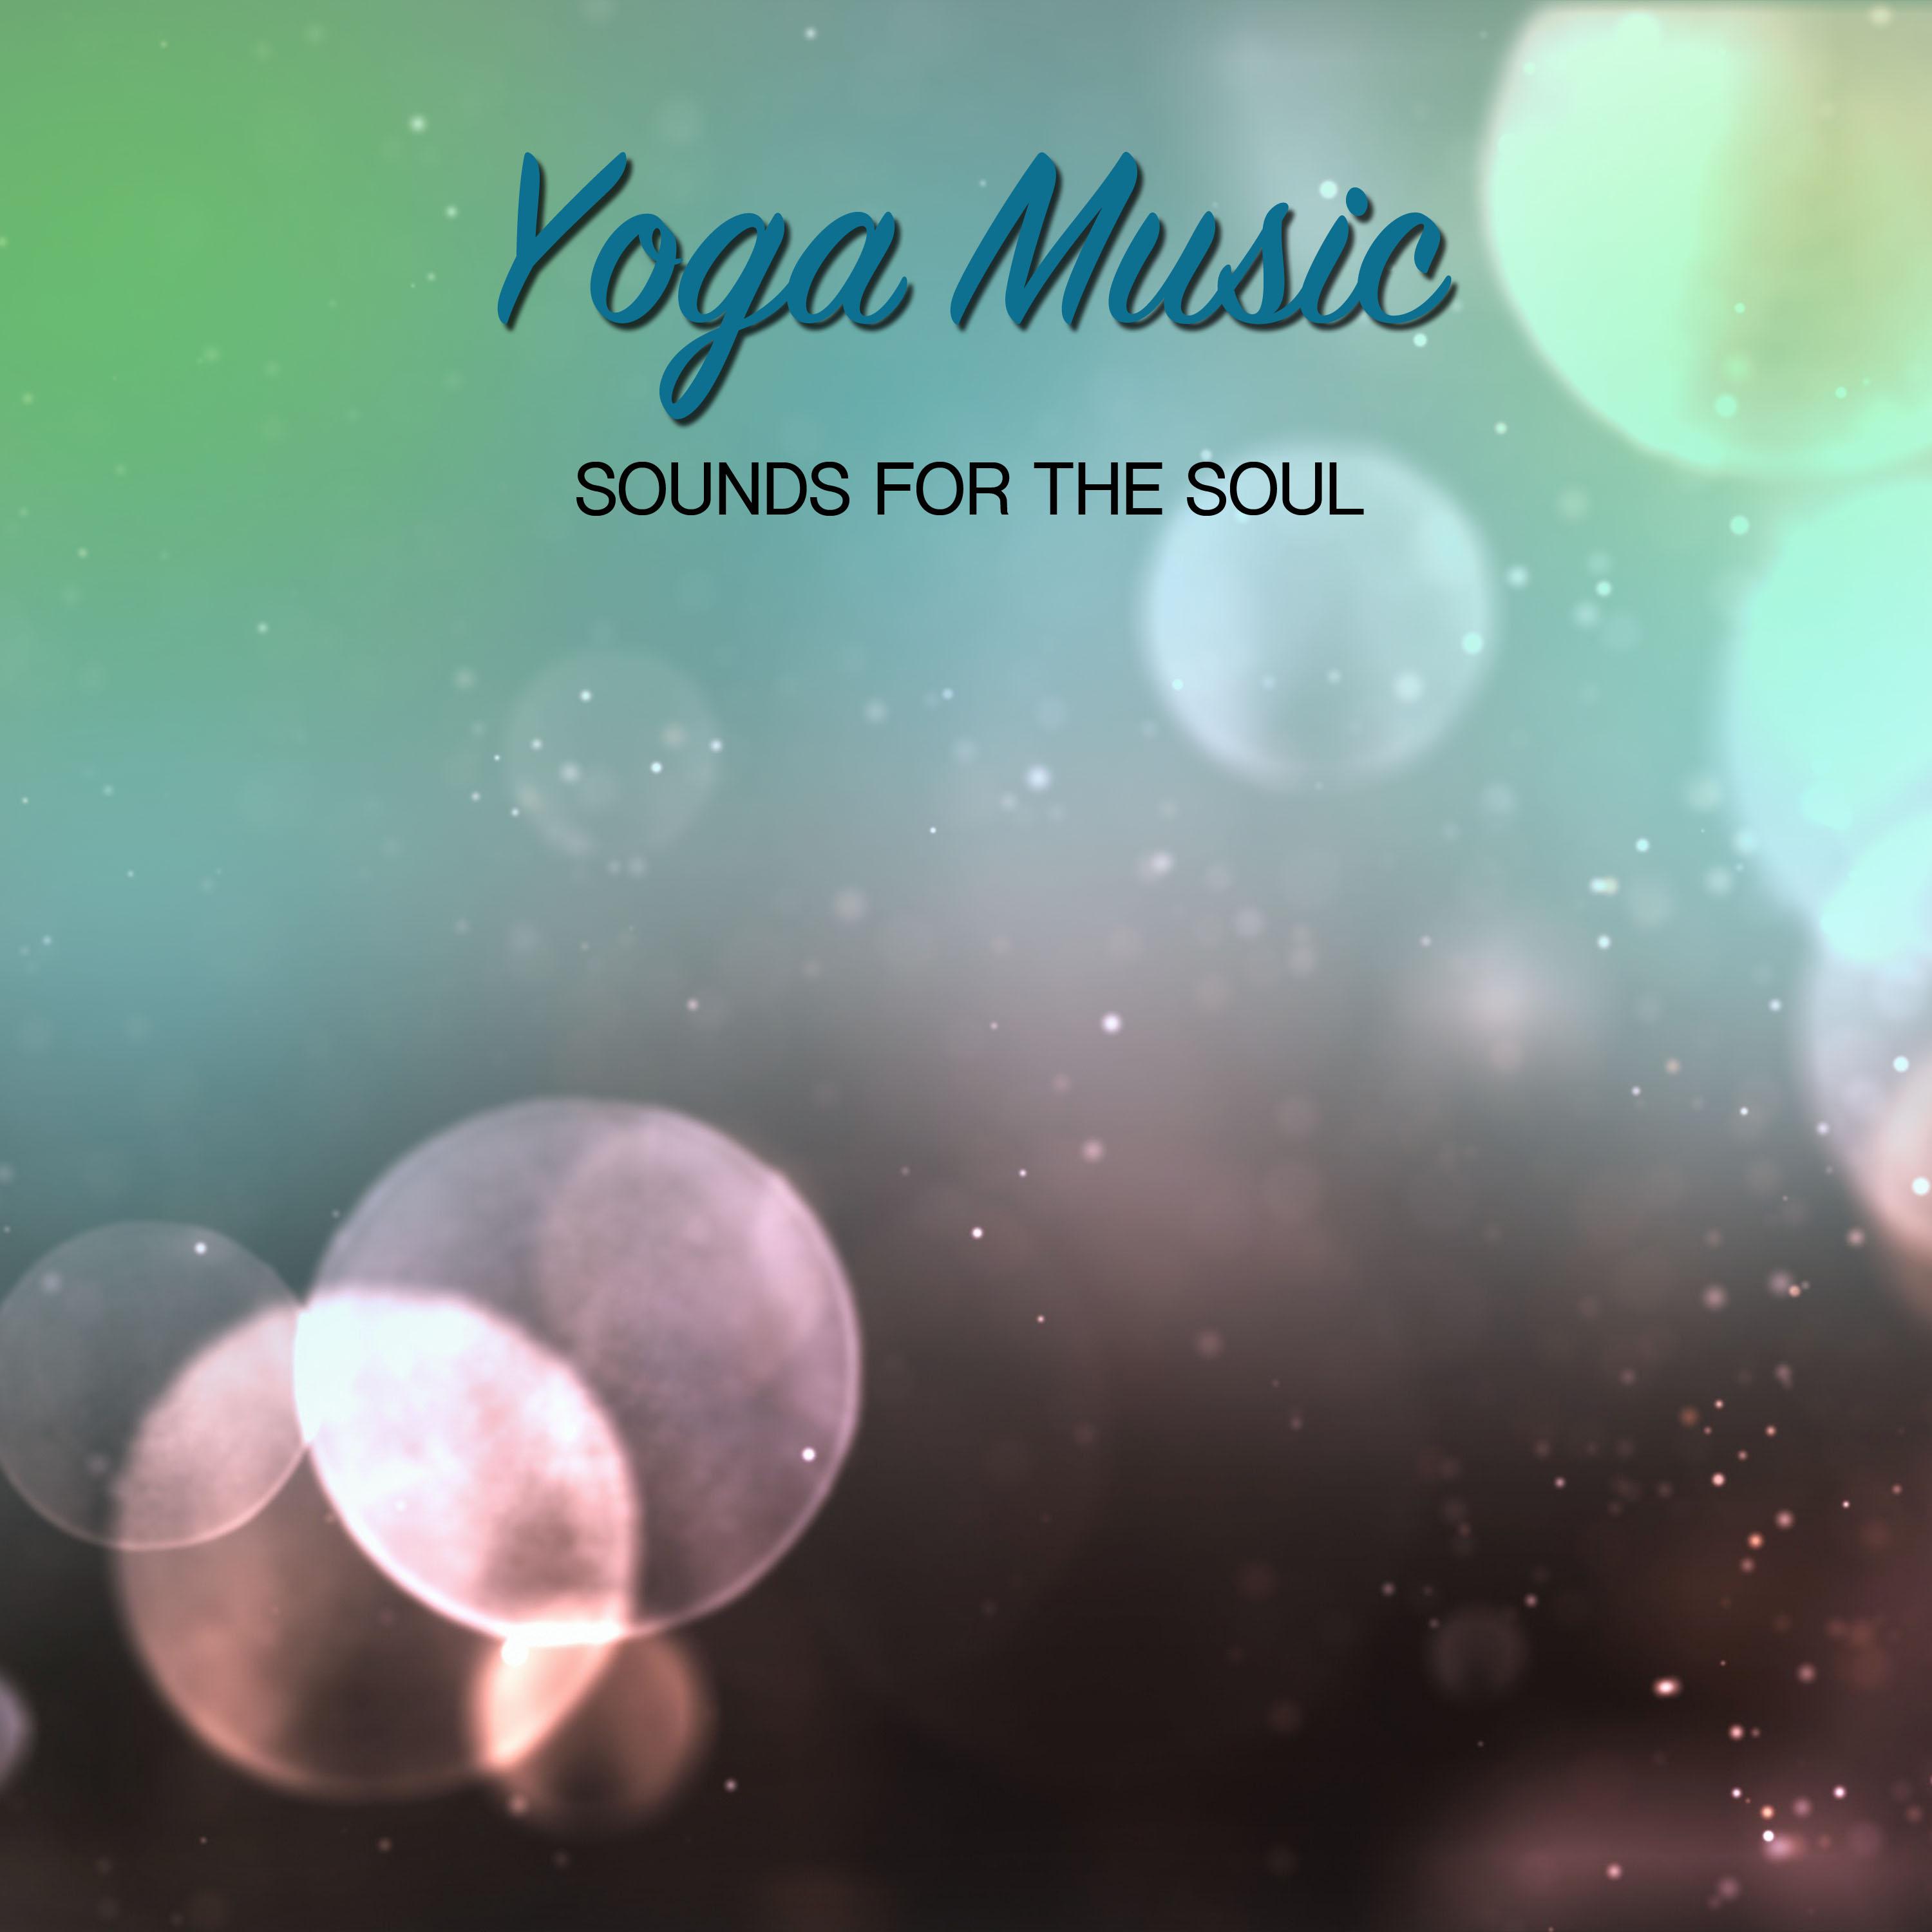 19 Sounds for the Soul: Yoga Music